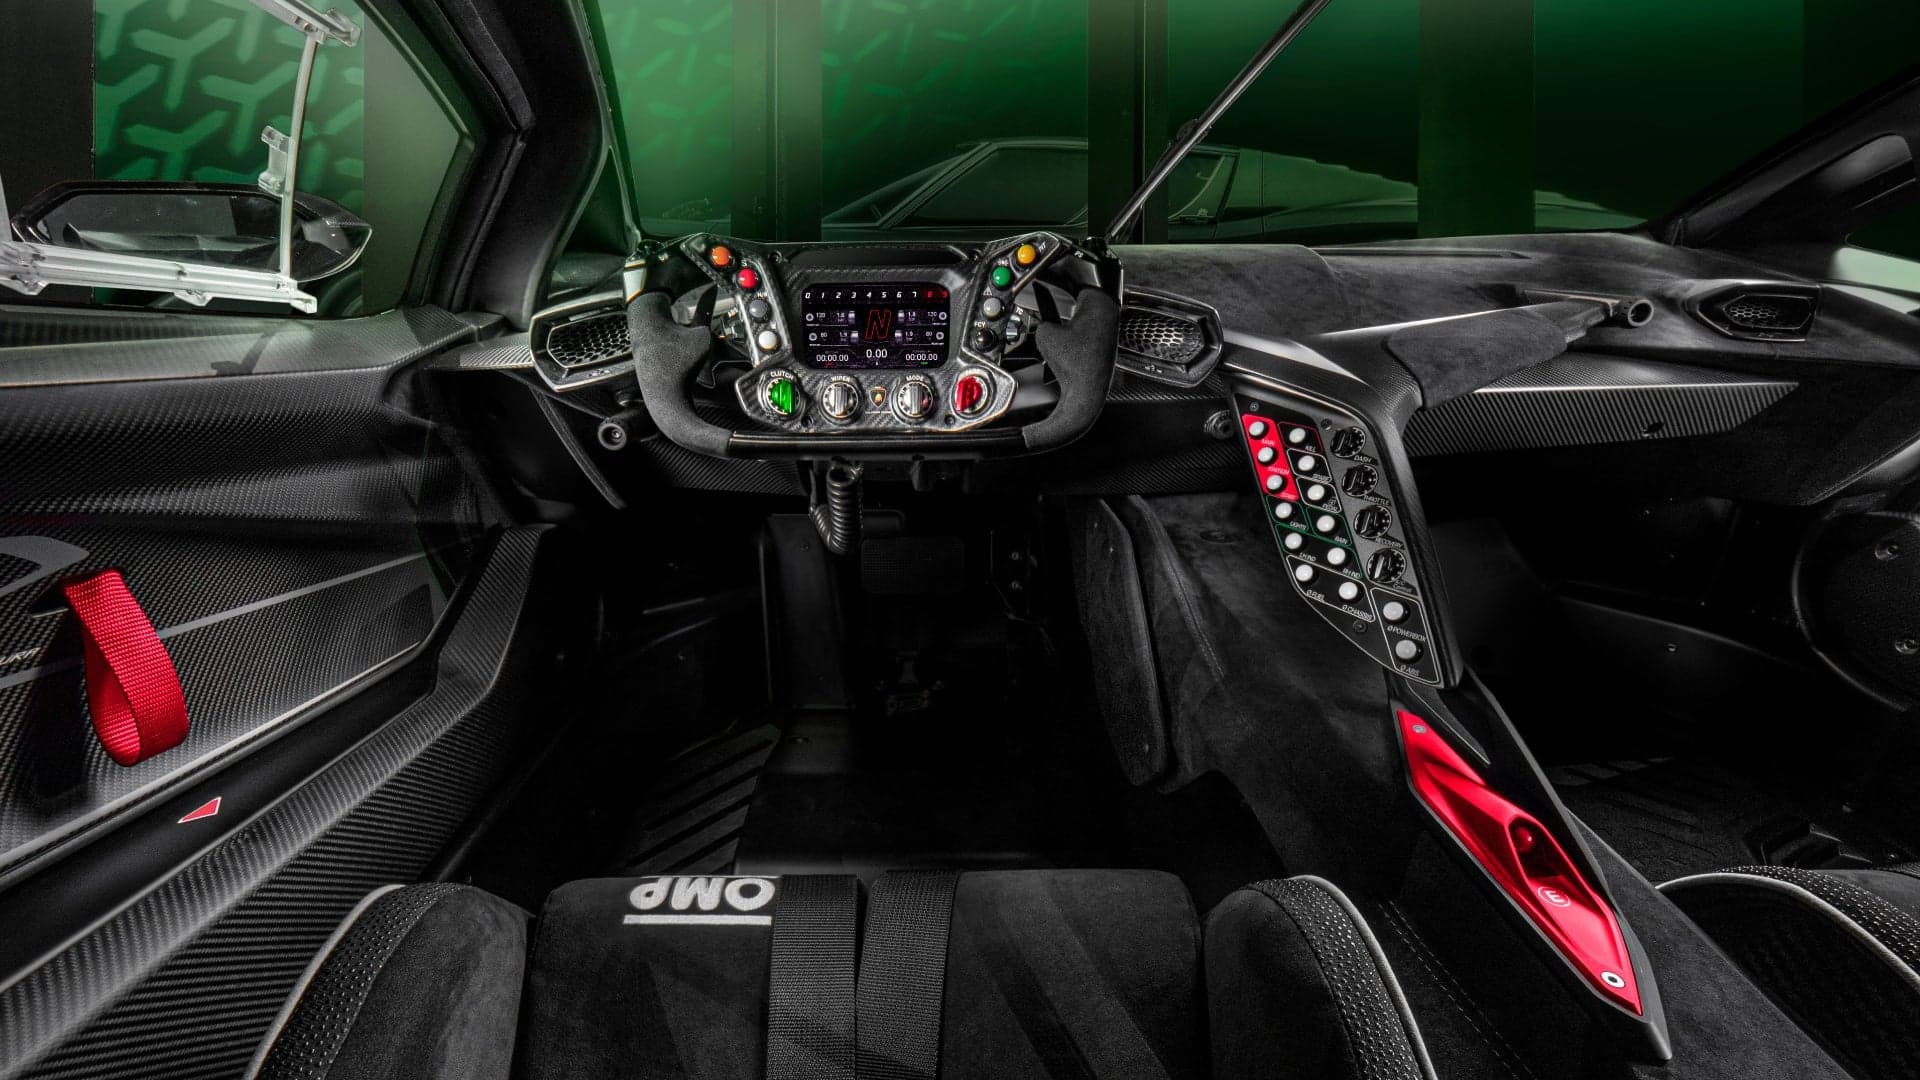 What It’s Like Having an 830-HP Lamborghini V12 Inches From Your Ears